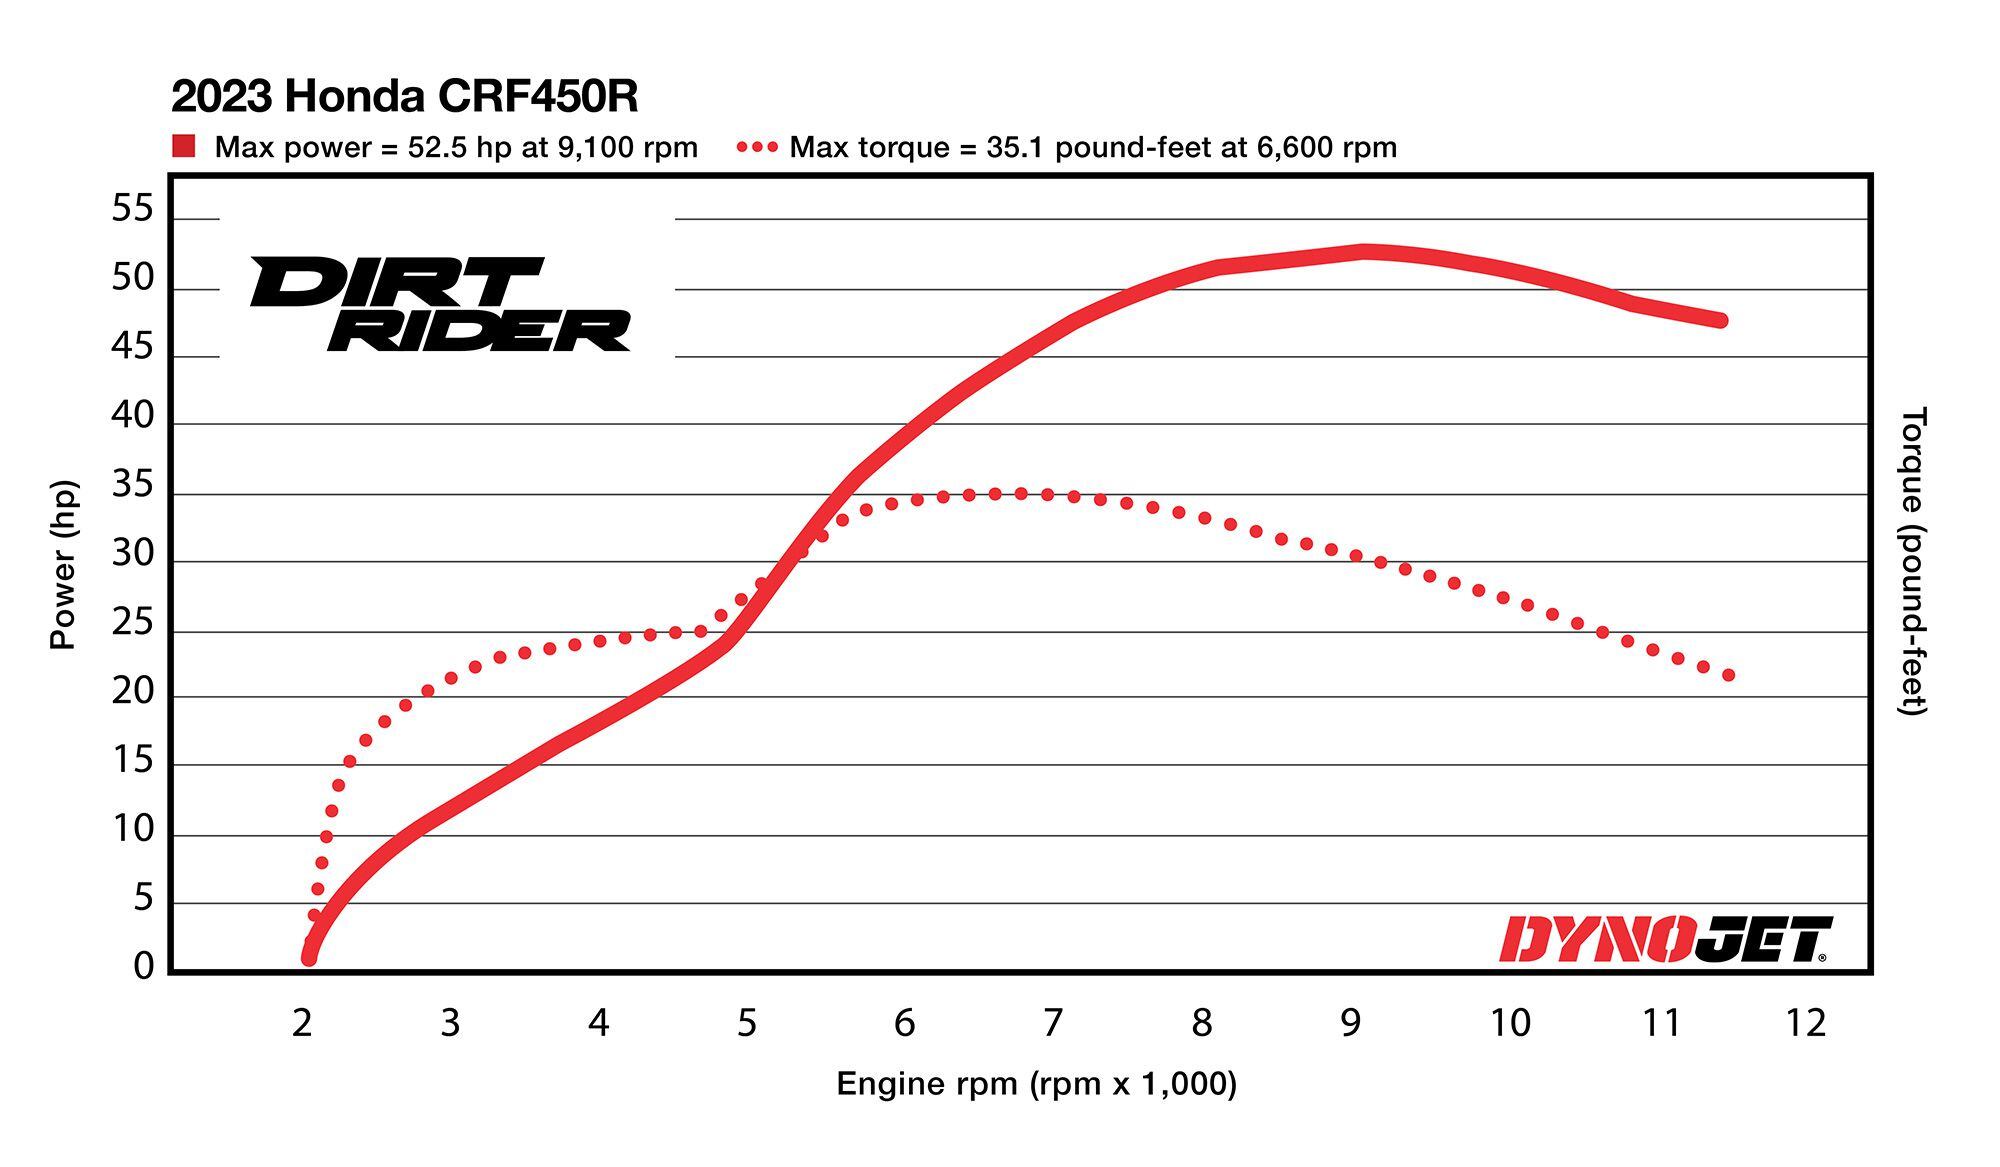 At 35.1 lb.-ft. of torque on our in-house dyno, Honda can claim it produces the most peak torque of all 450 motocross bikes.